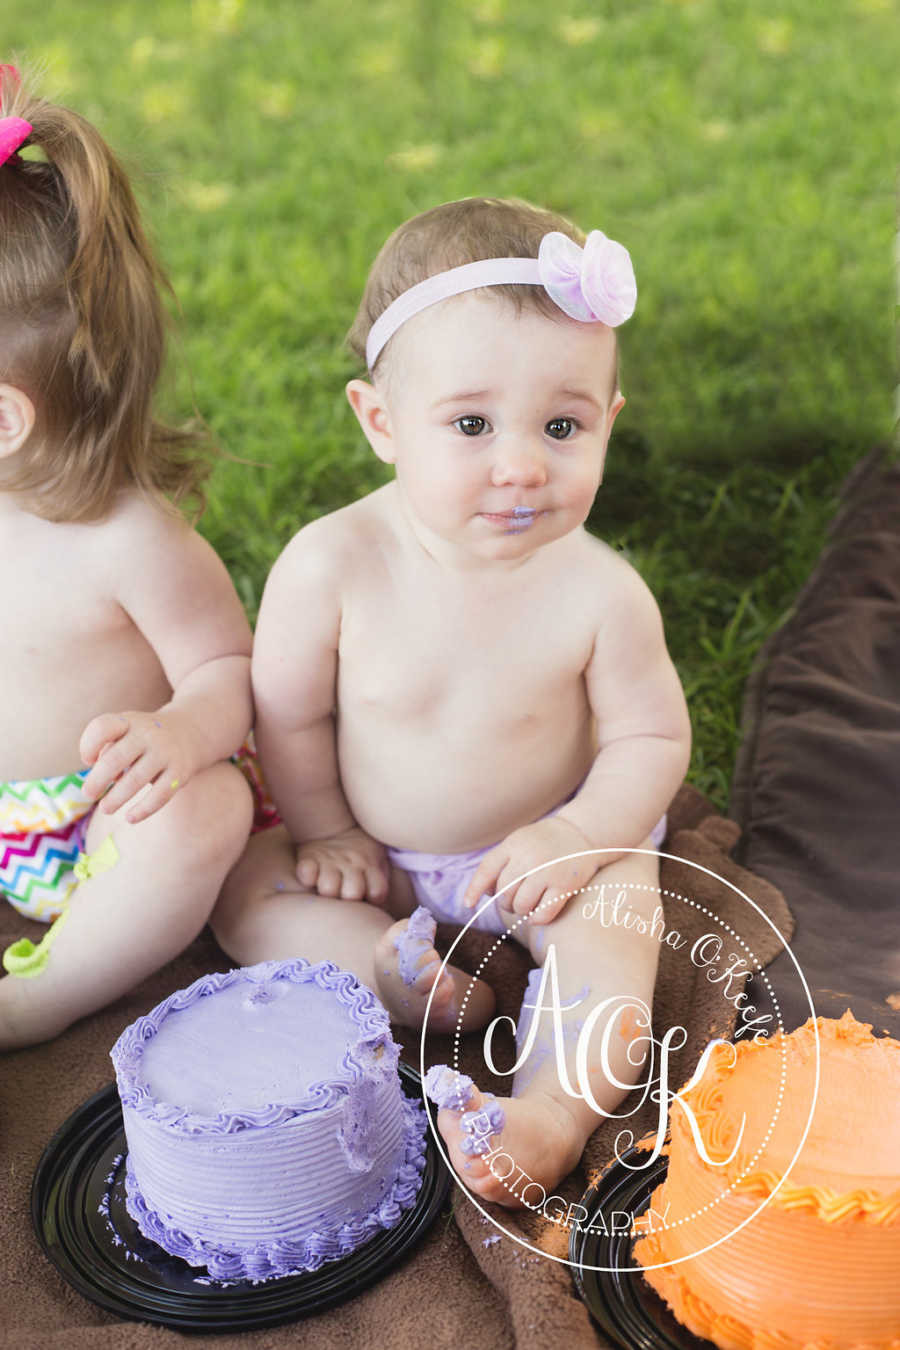 Infant with pink headband with bow sits with purple cake in front of her